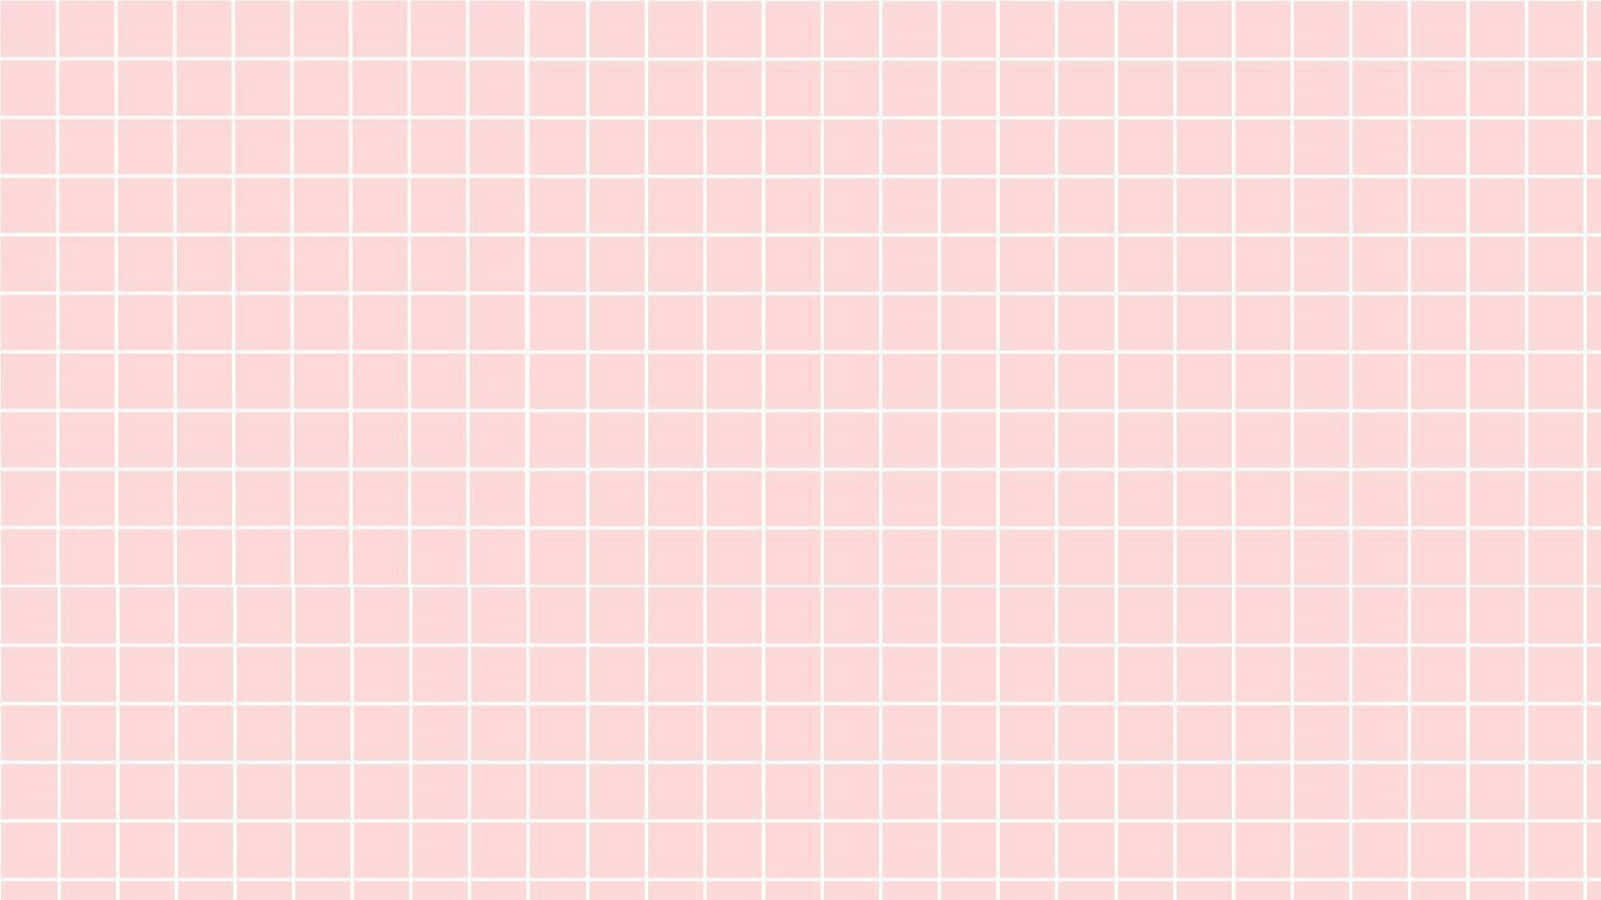 Aesthetic Grids in Soft Pastel Colors Wallpaper